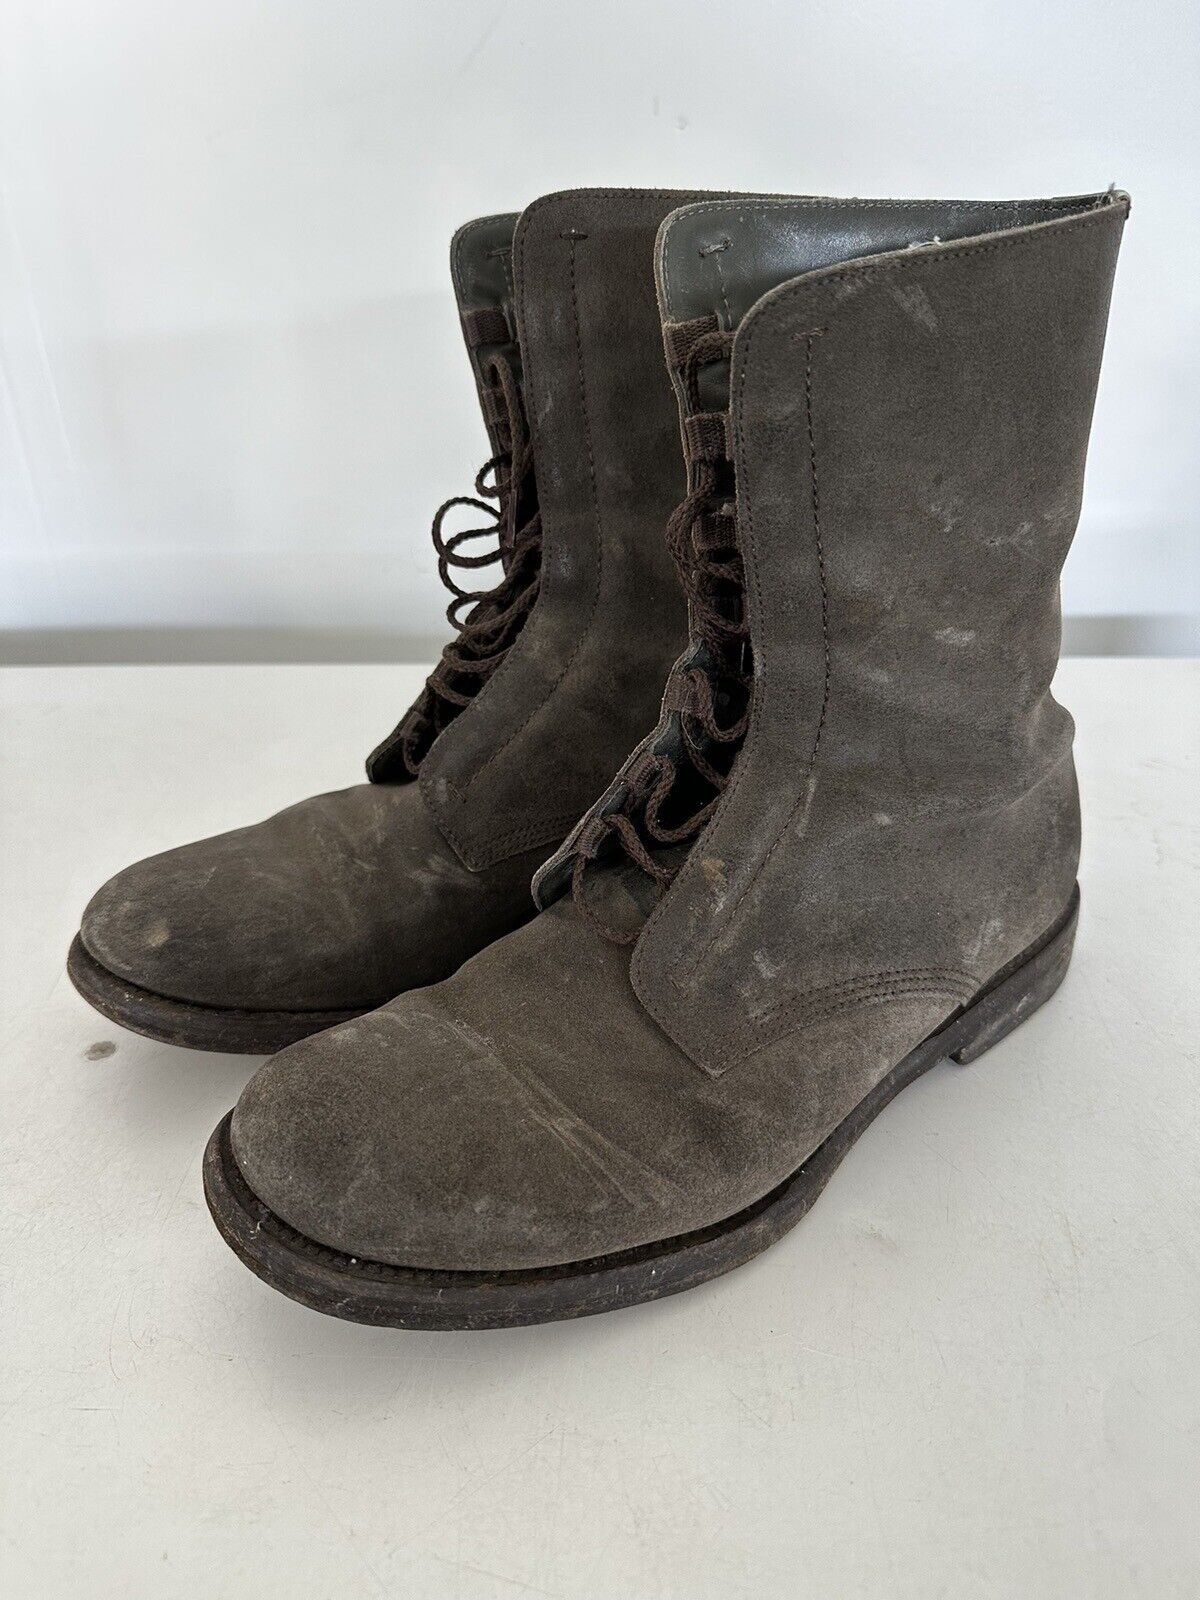 WW2 Ww1 Wwii German low boots Reproduction Gray 169 Size 8.5 Used Reenactment